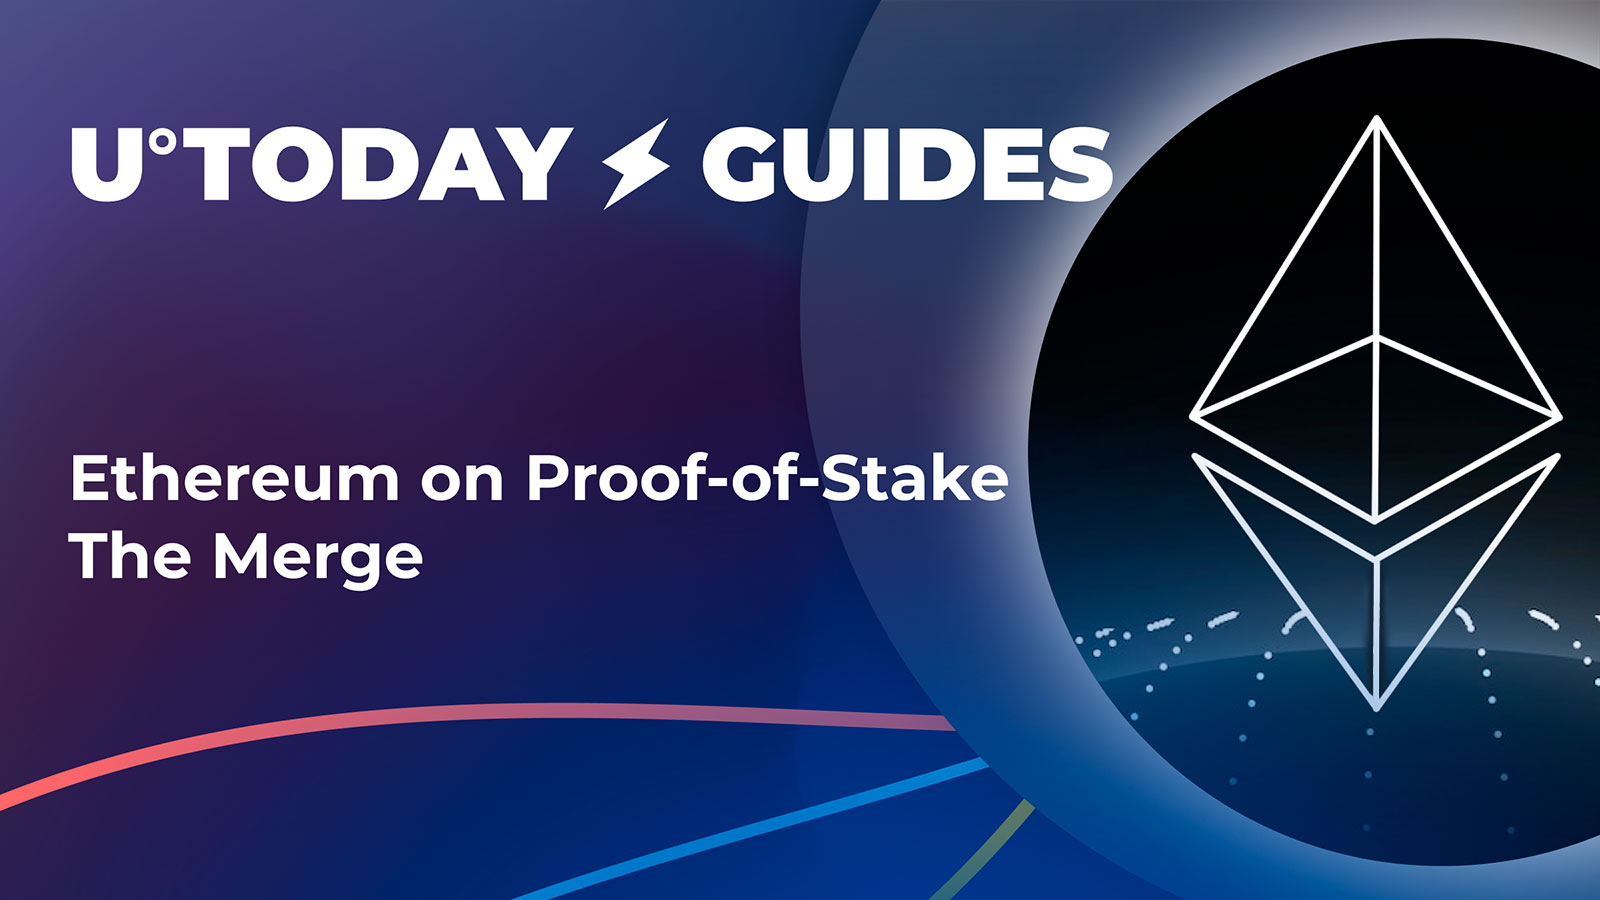 Ethereum on Proof-of-Stake: Comprehensive Guide to The Merge